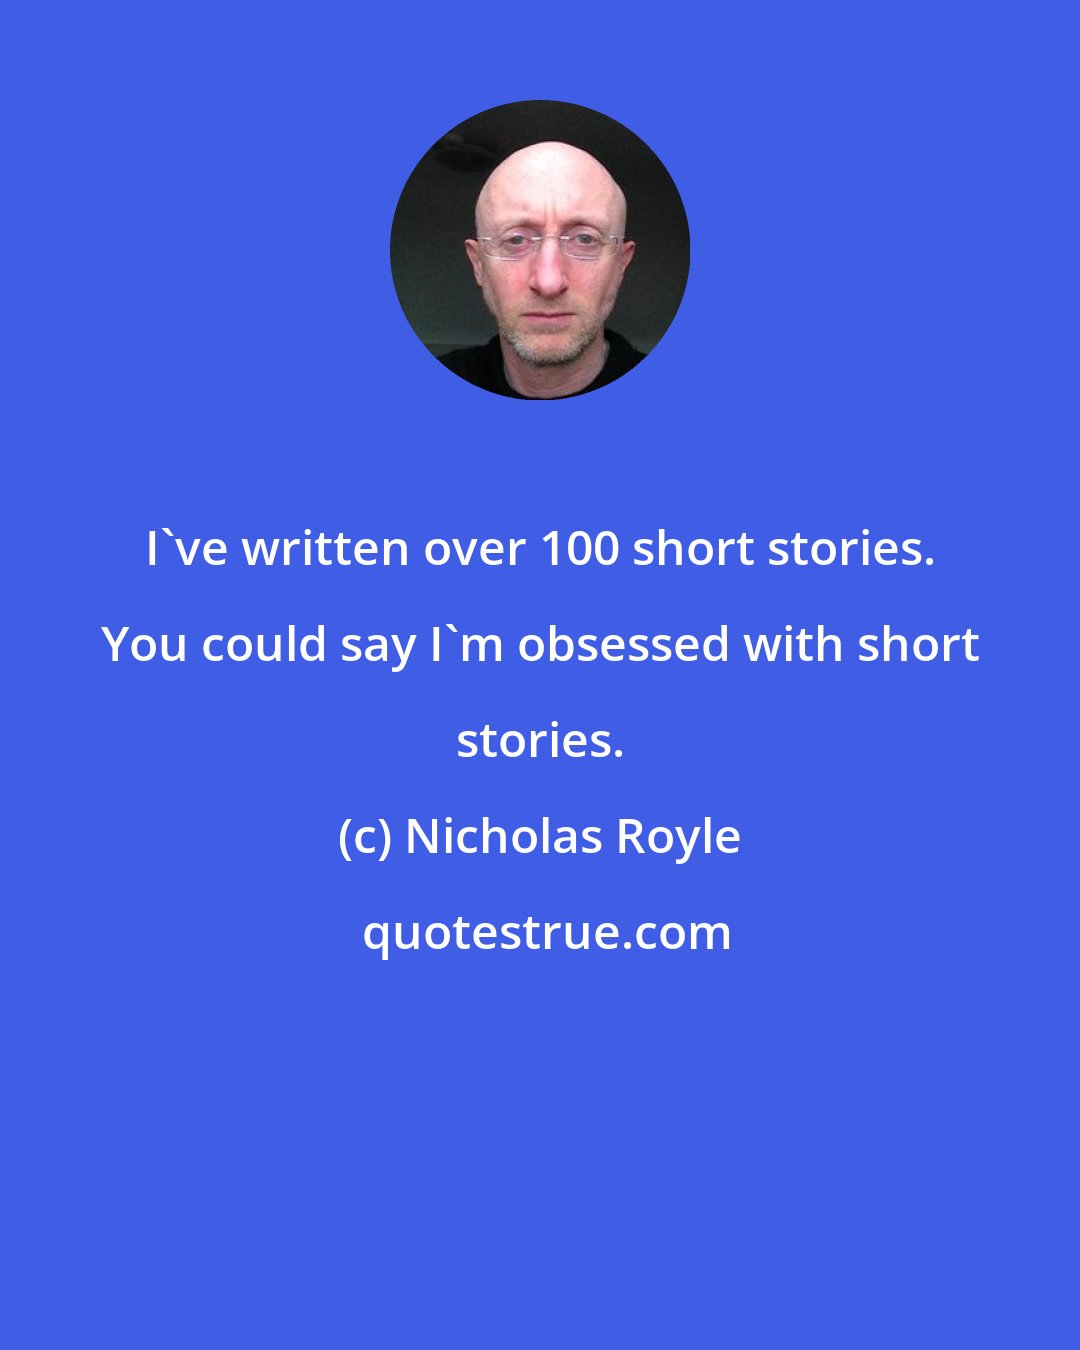 Nicholas Royle: I've written over 100 short stories. You could say I'm obsessed with short stories.